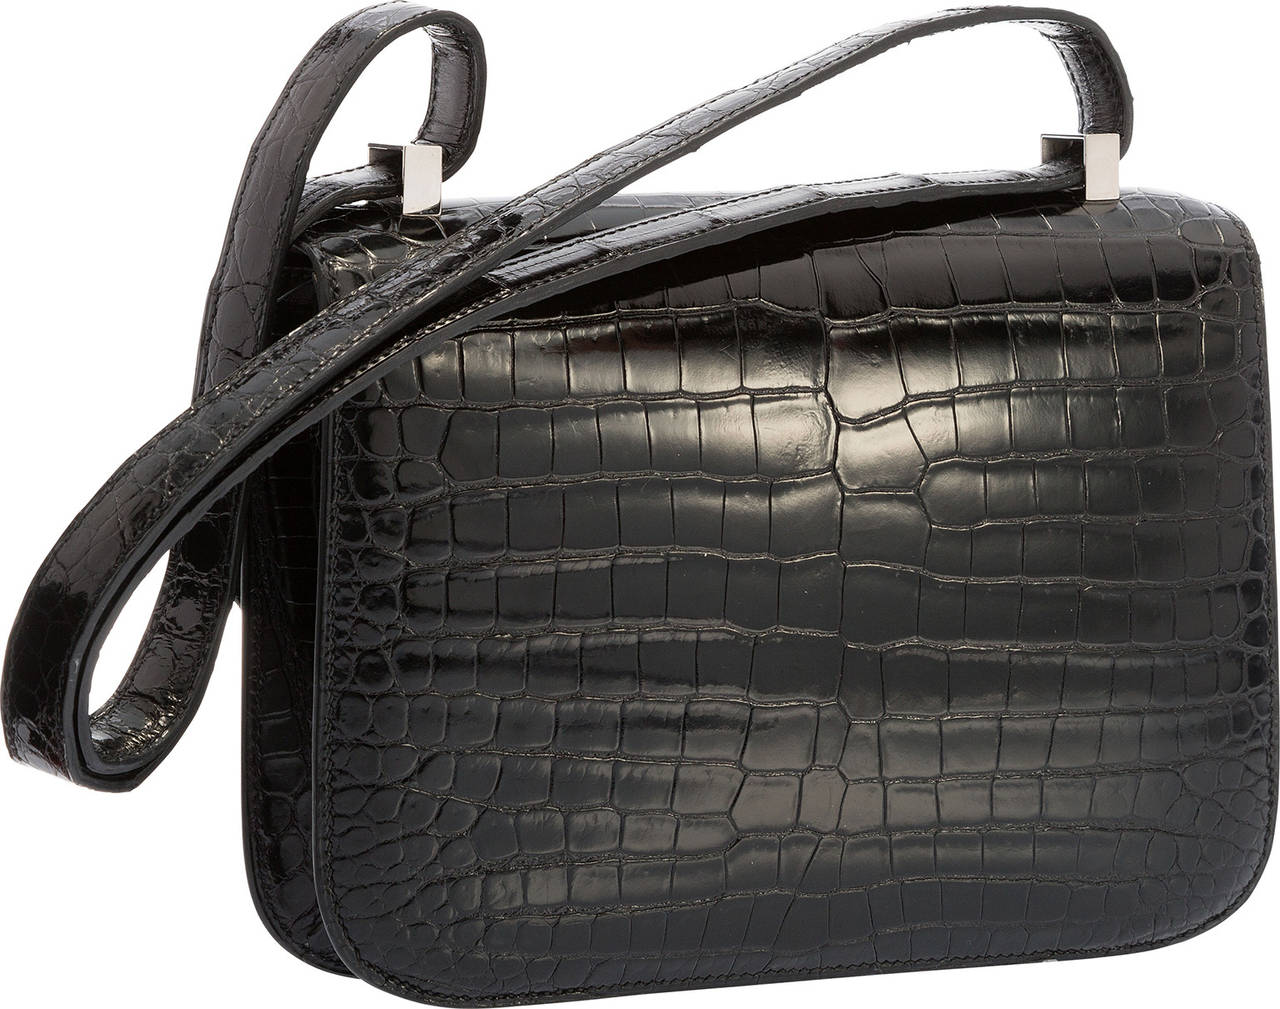 The Hermes Constance is quickly gaining popularity amongst savvy collectors. The Constance was designed in the 1960s and it has stood the test of time. This particular Constance is done in Shiny Black Porosus Crocodile, and accented with Palladium